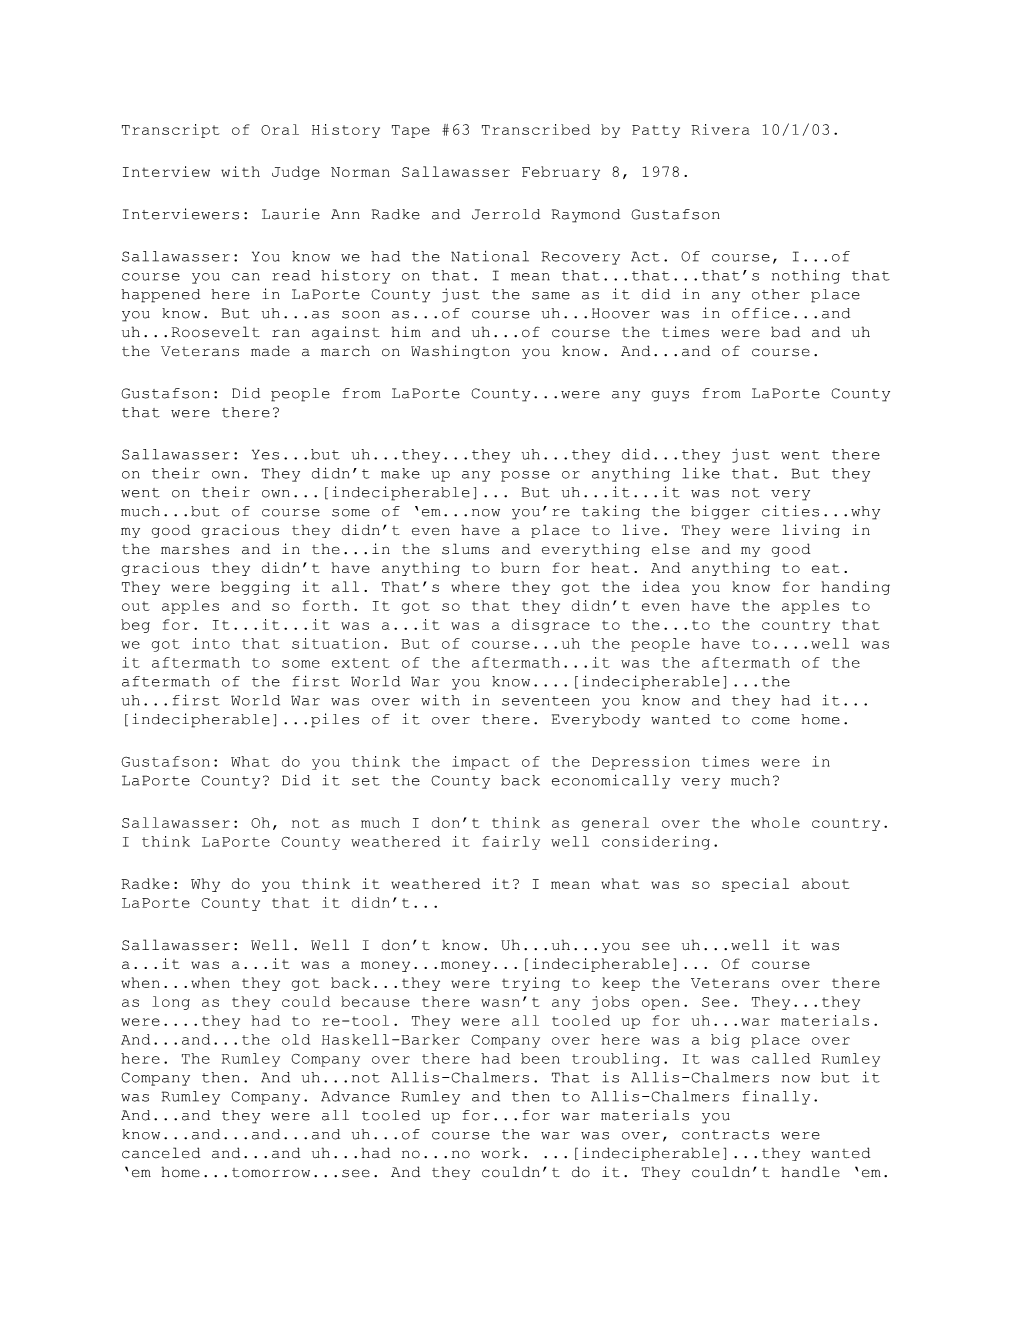 Transcript of Oral History Tape #63 Transcribed by Patty Rivera 10/1/03